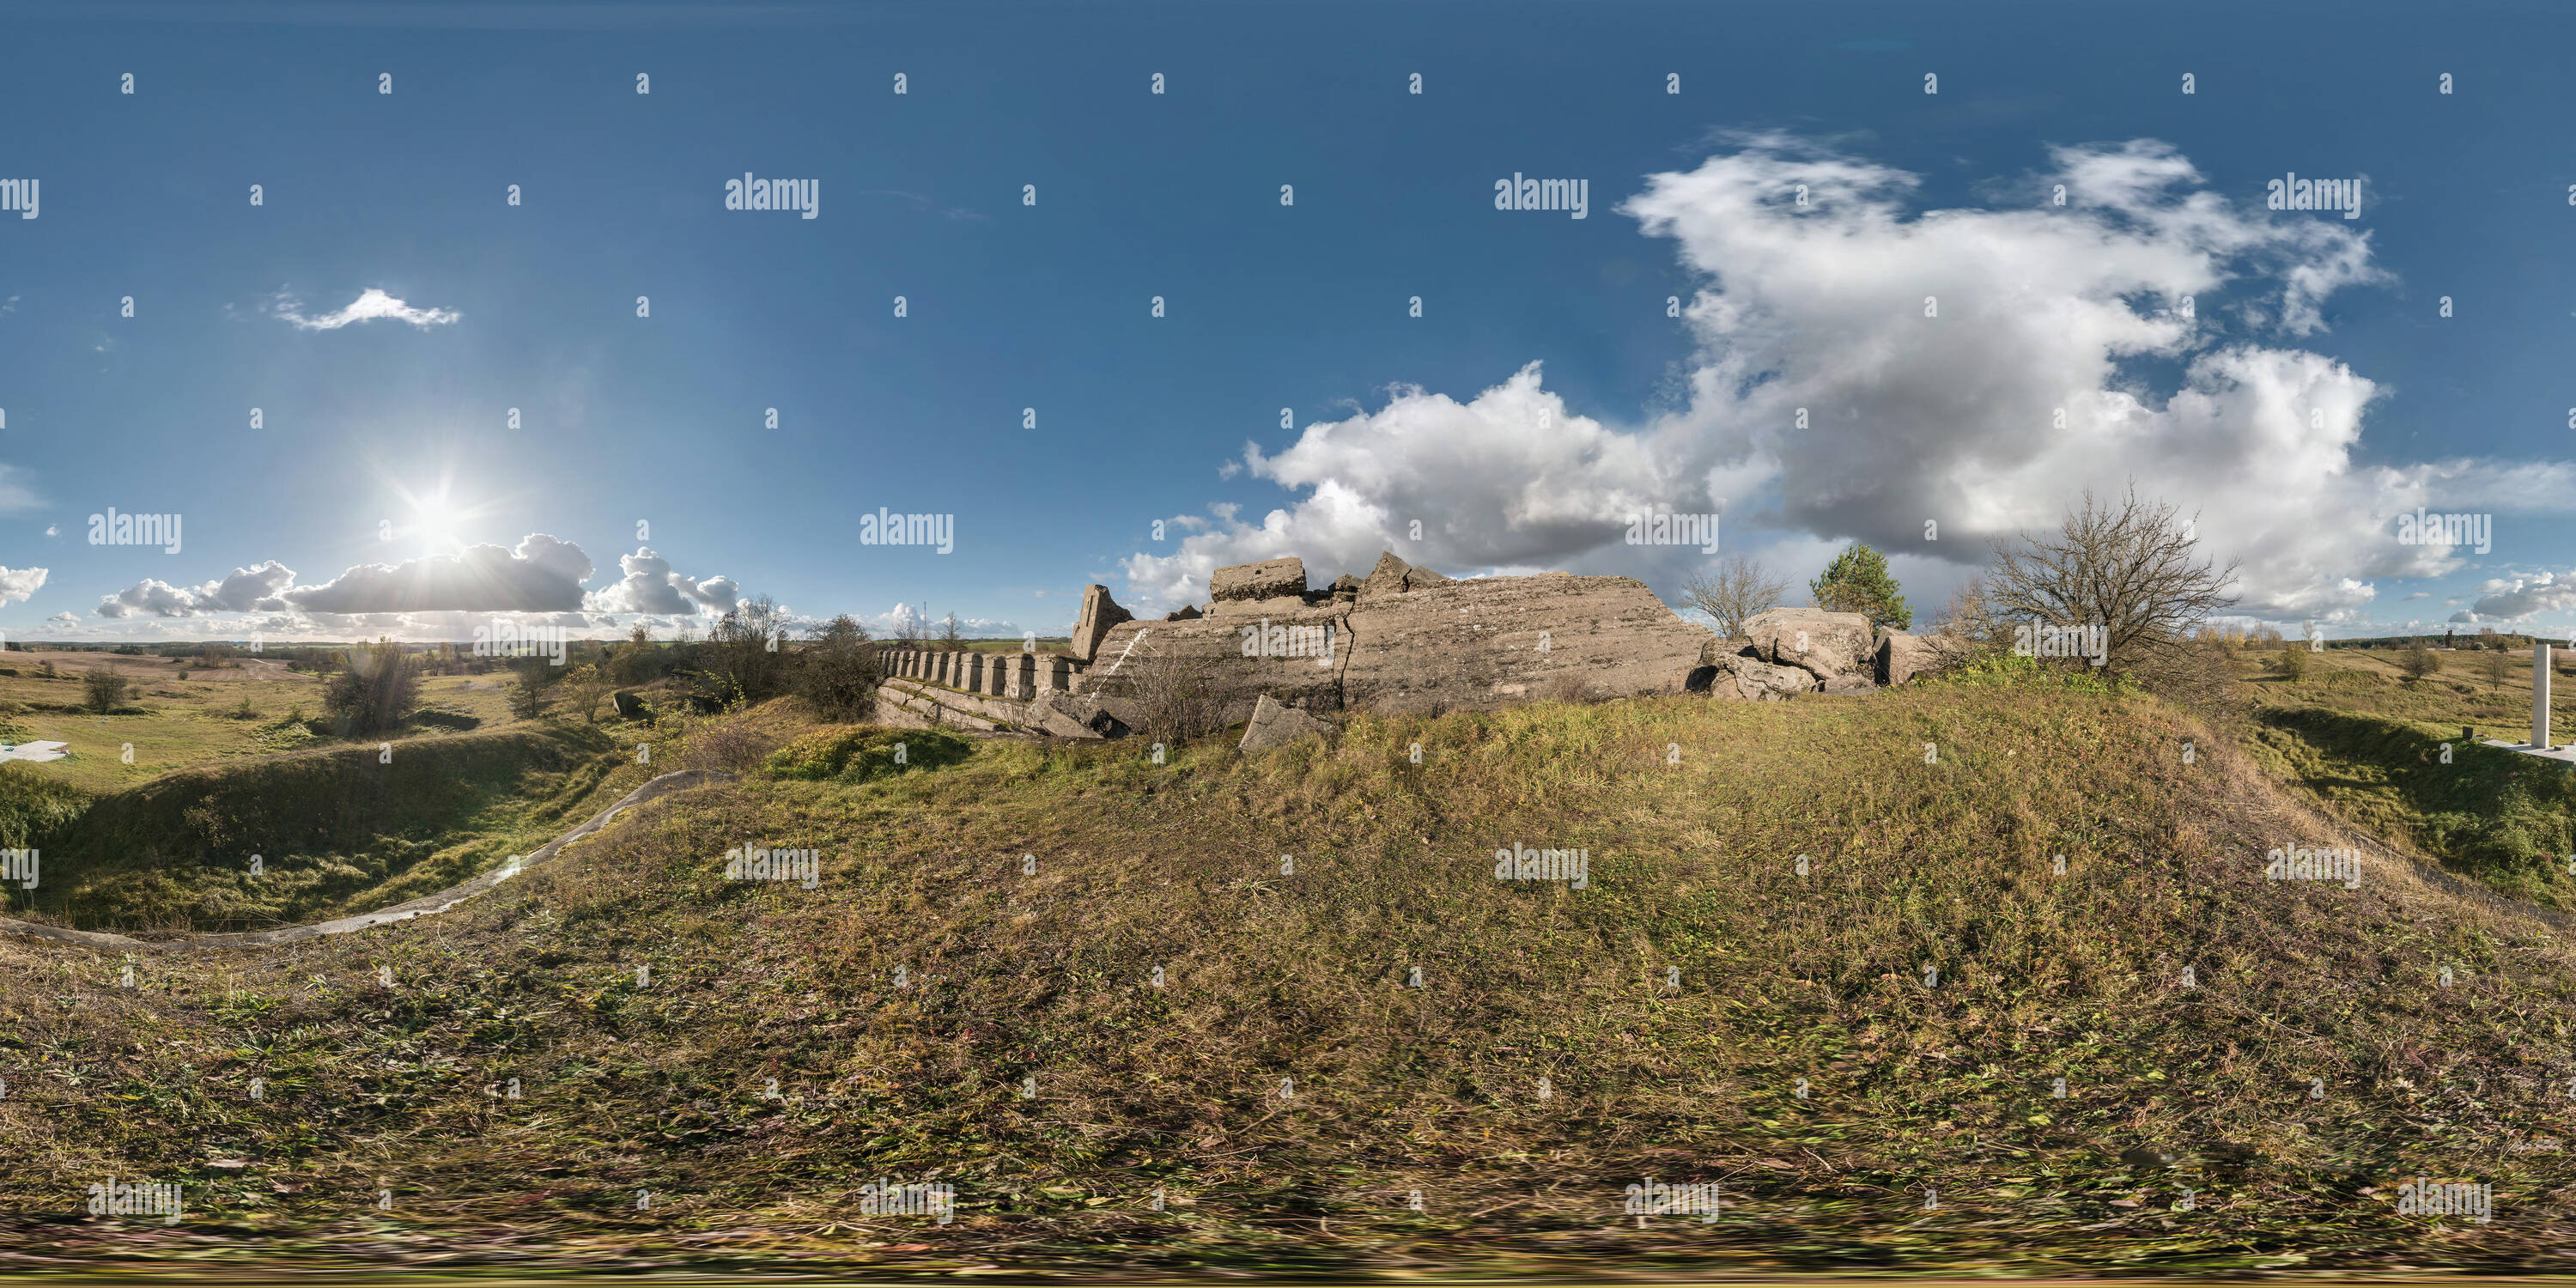 https://l13.alamy.com/360/R2KJK9/full-360-equirectangular-equidistant-spherical-panorama-as-background-approaching-storm-on-the-ruined-military-fortress-of-the-first-world-war-skybo-R2KJK9.jpg